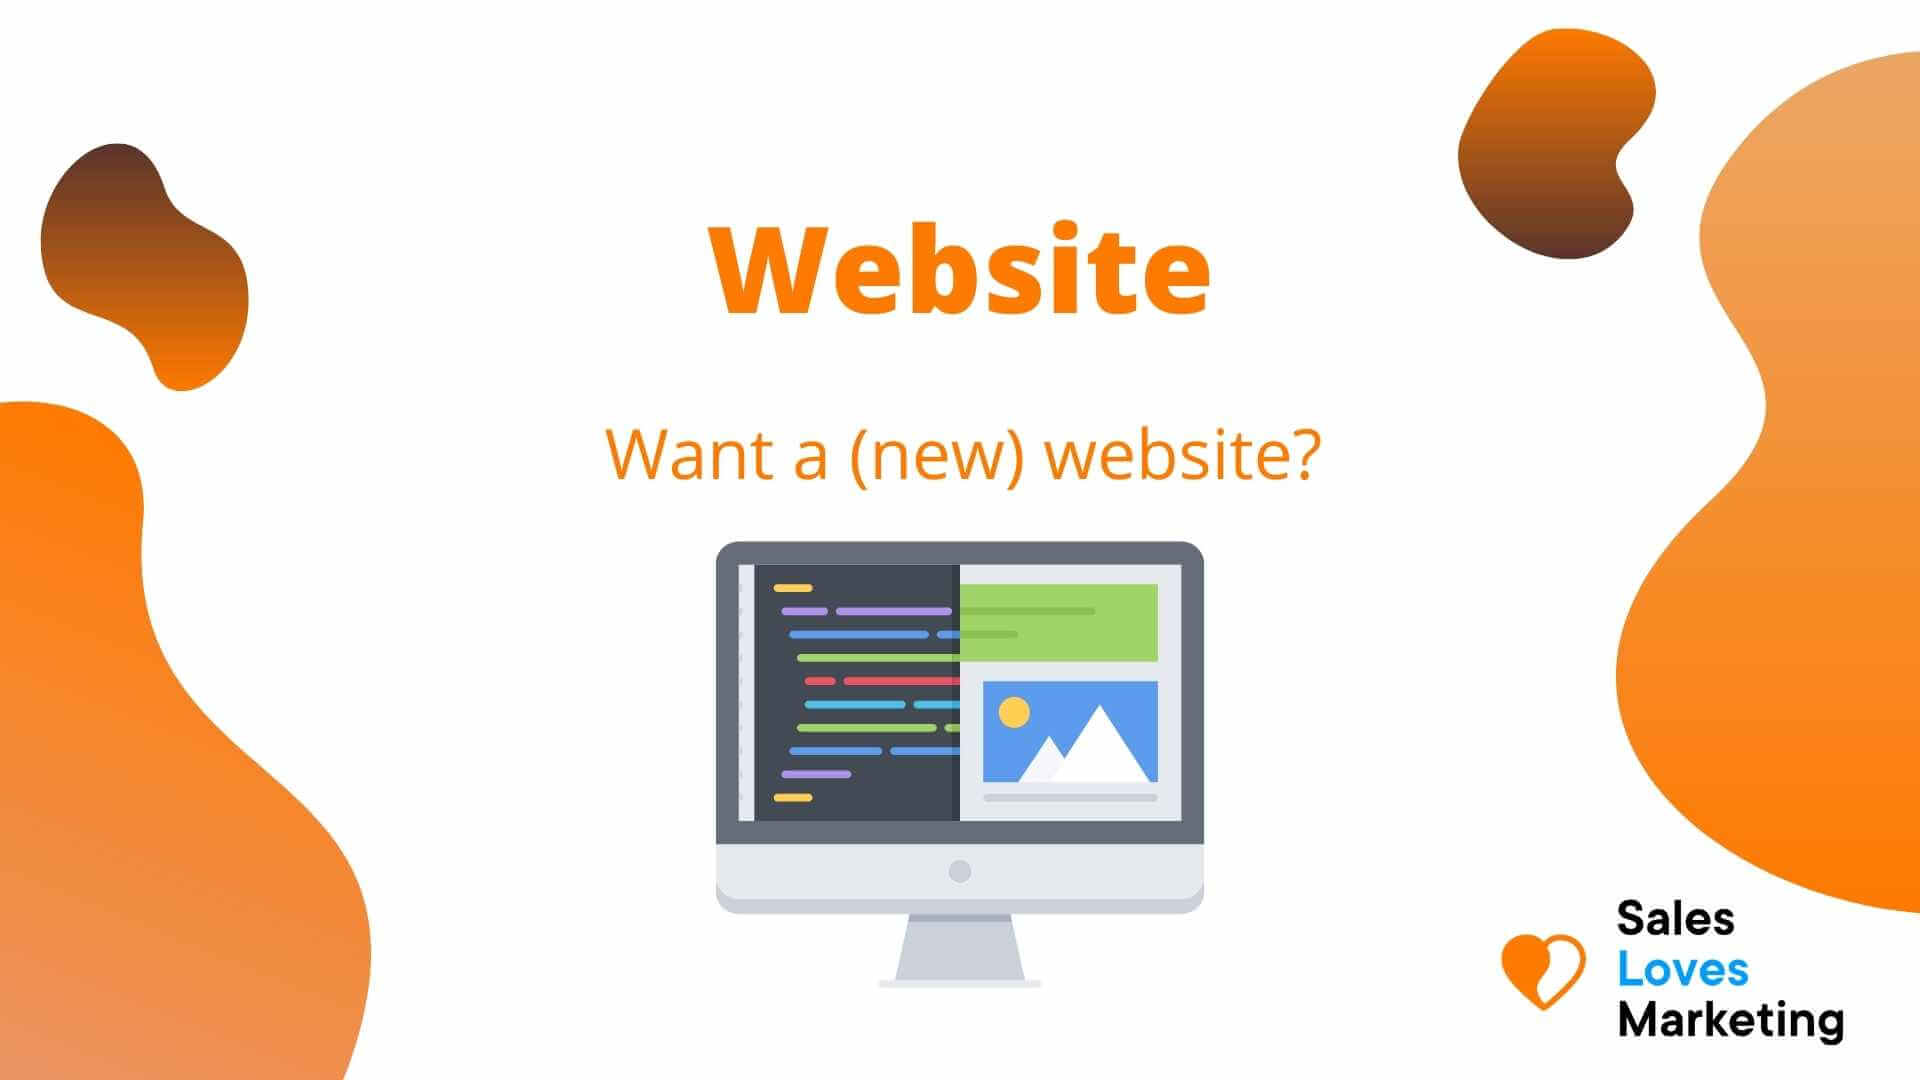 Want to create a website?